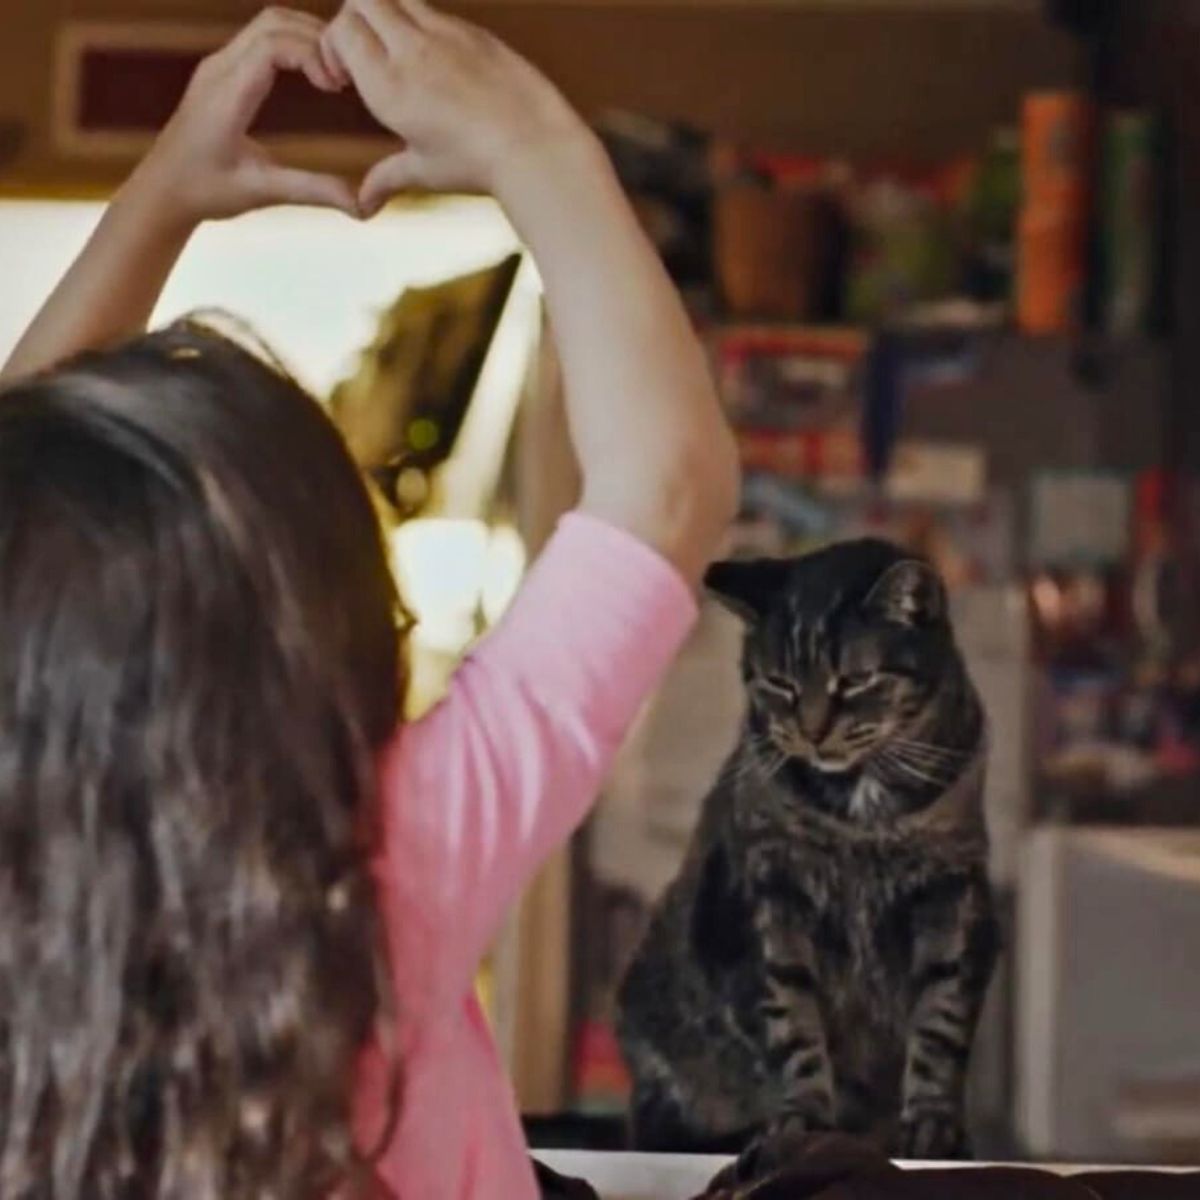 girl making a heart shape with hands while looking at cat